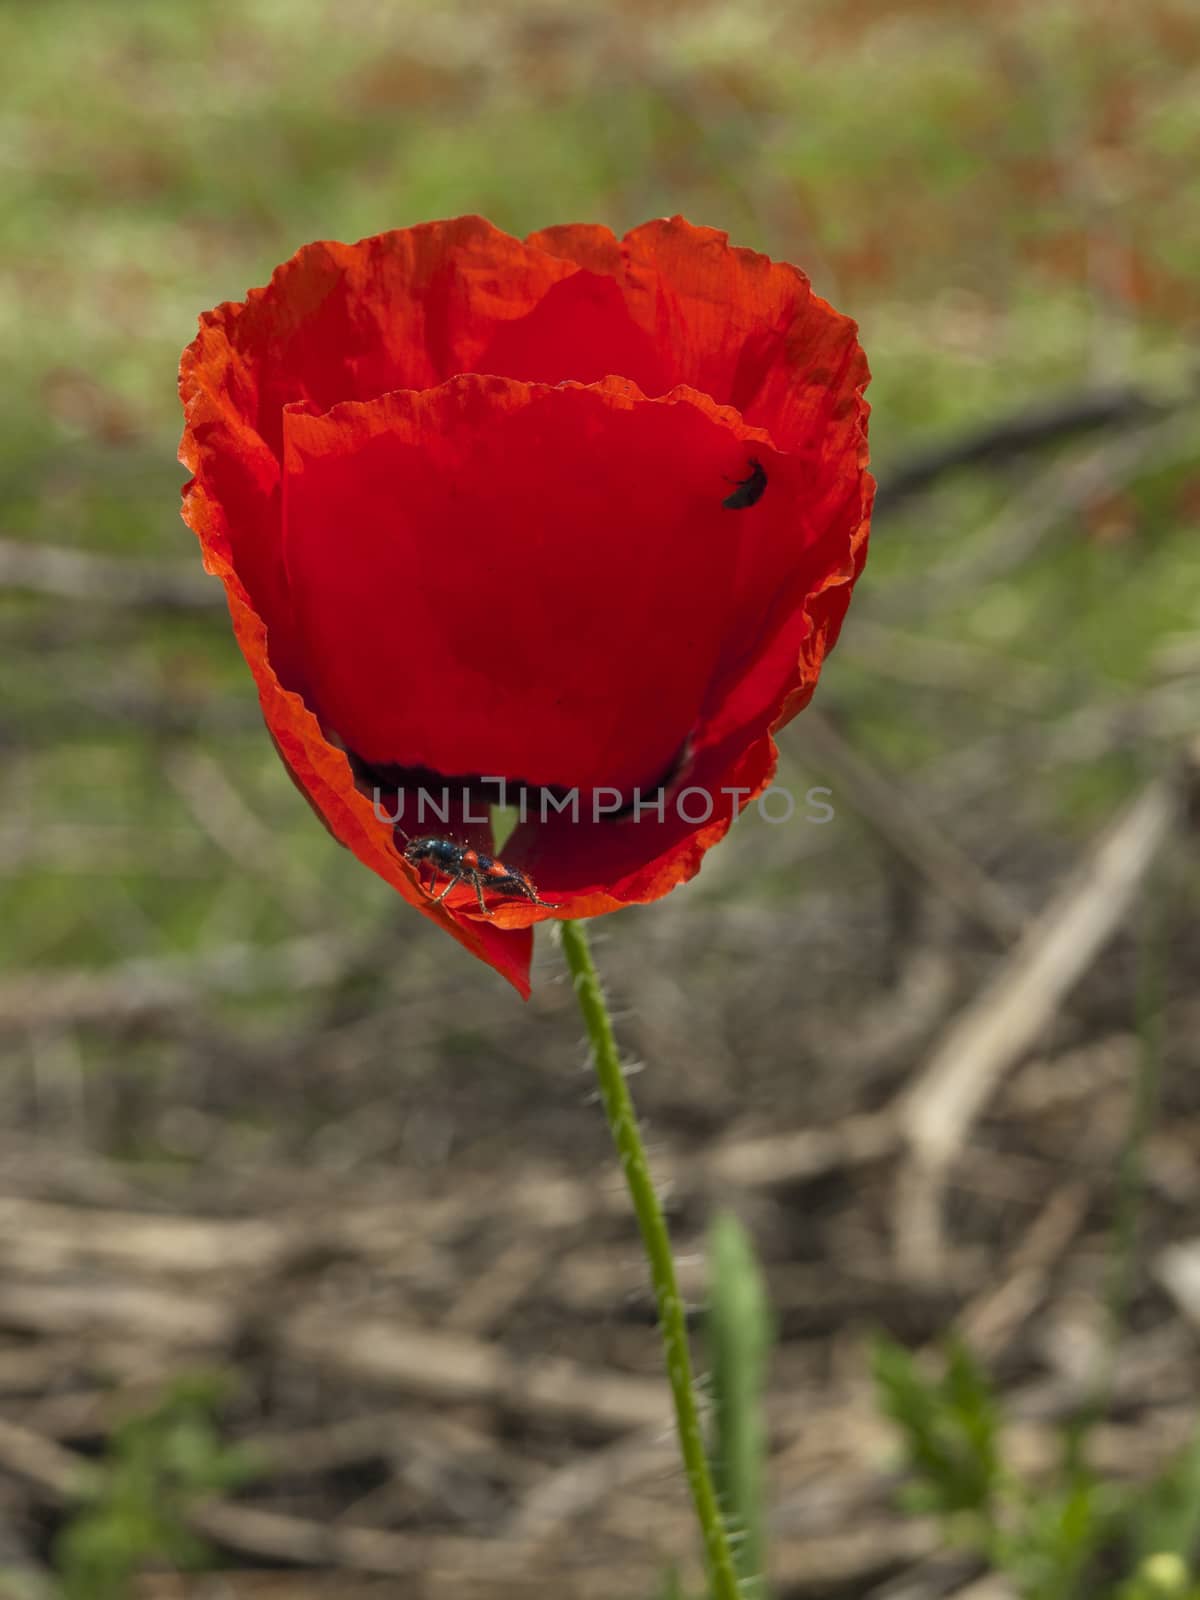 The red poppy with insects